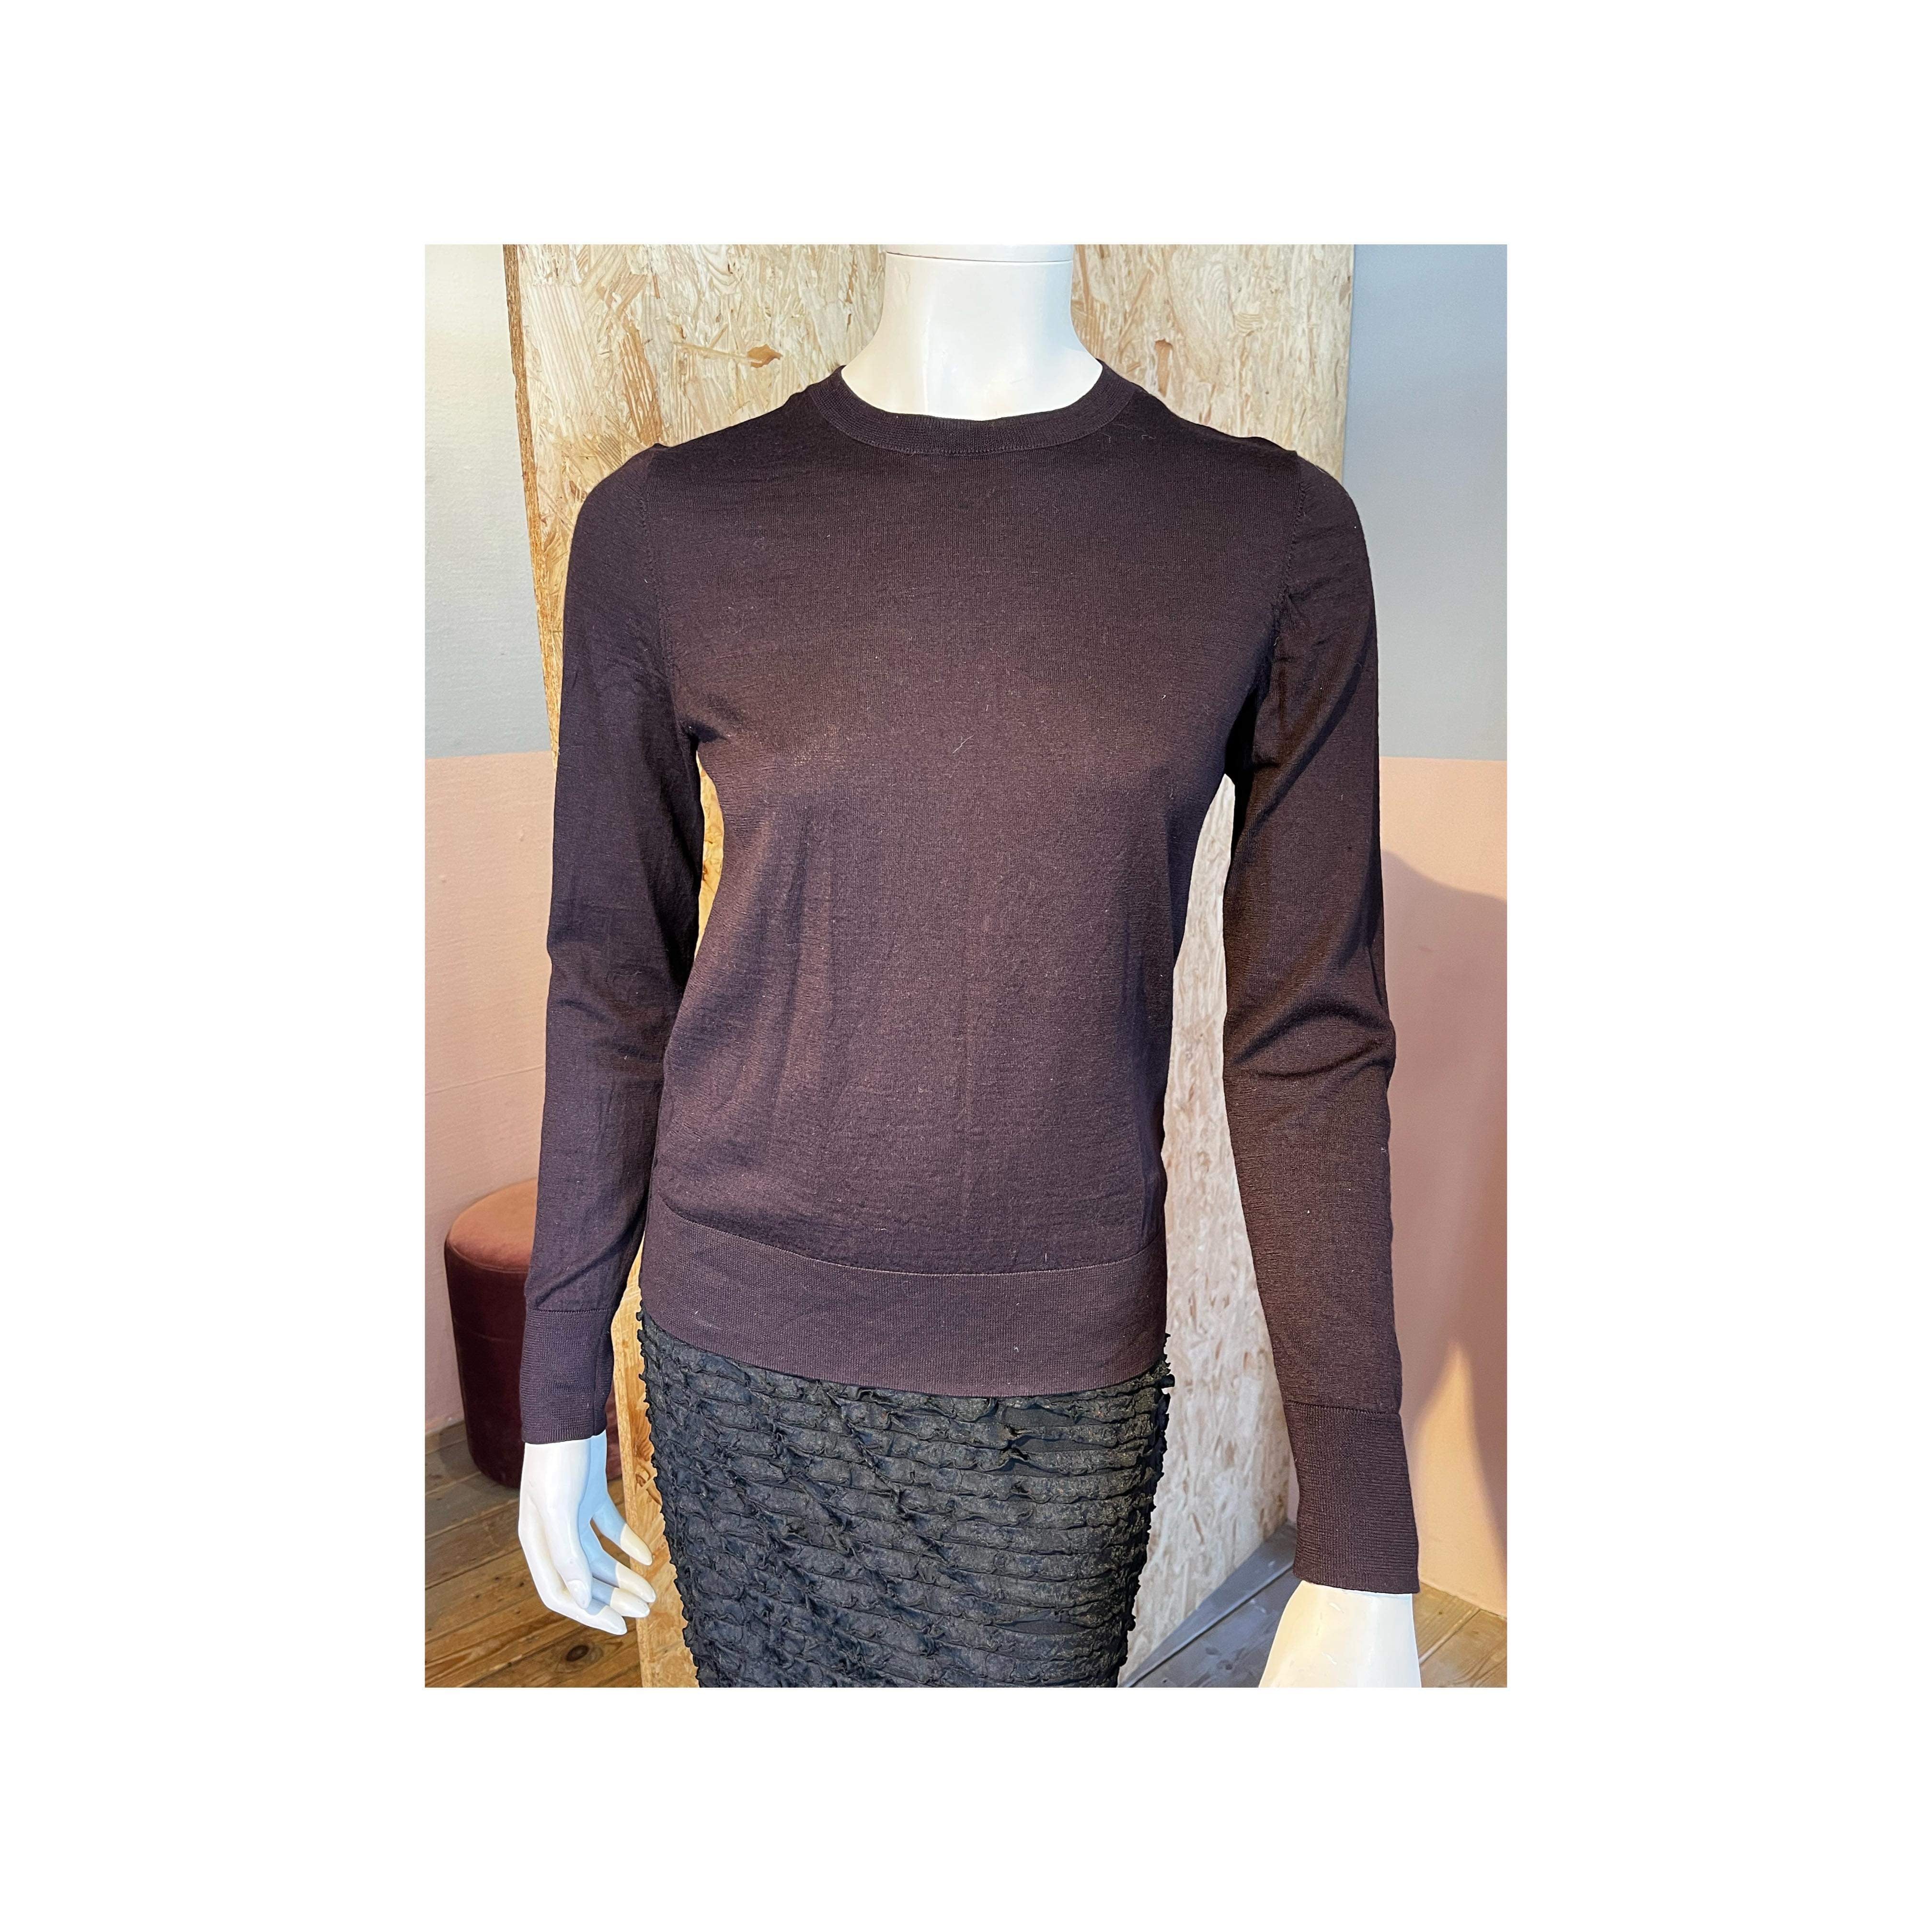 Cos - Sweater - Size: S